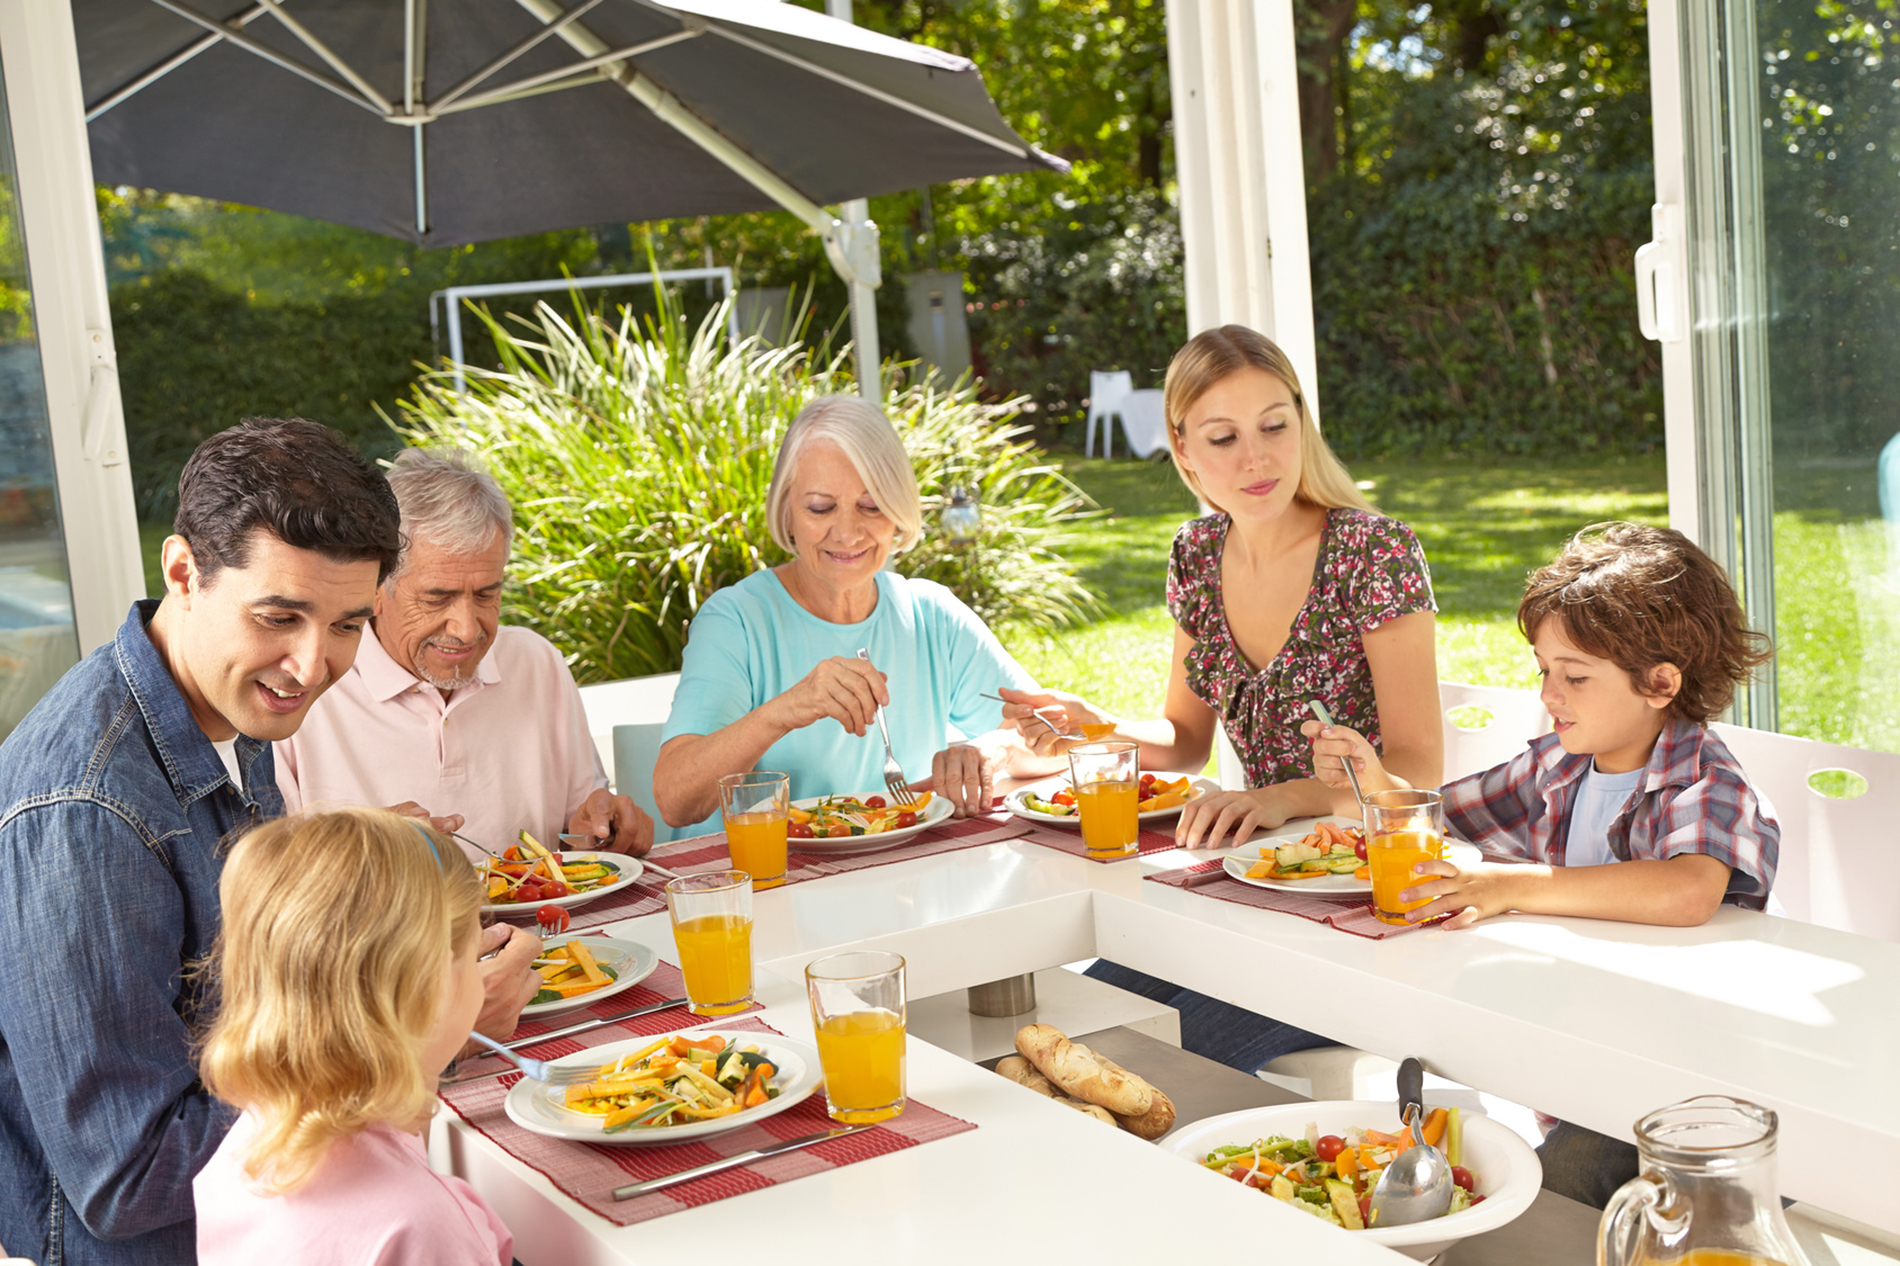 7 Reasons Why Eating Together as a Family Is So Precious